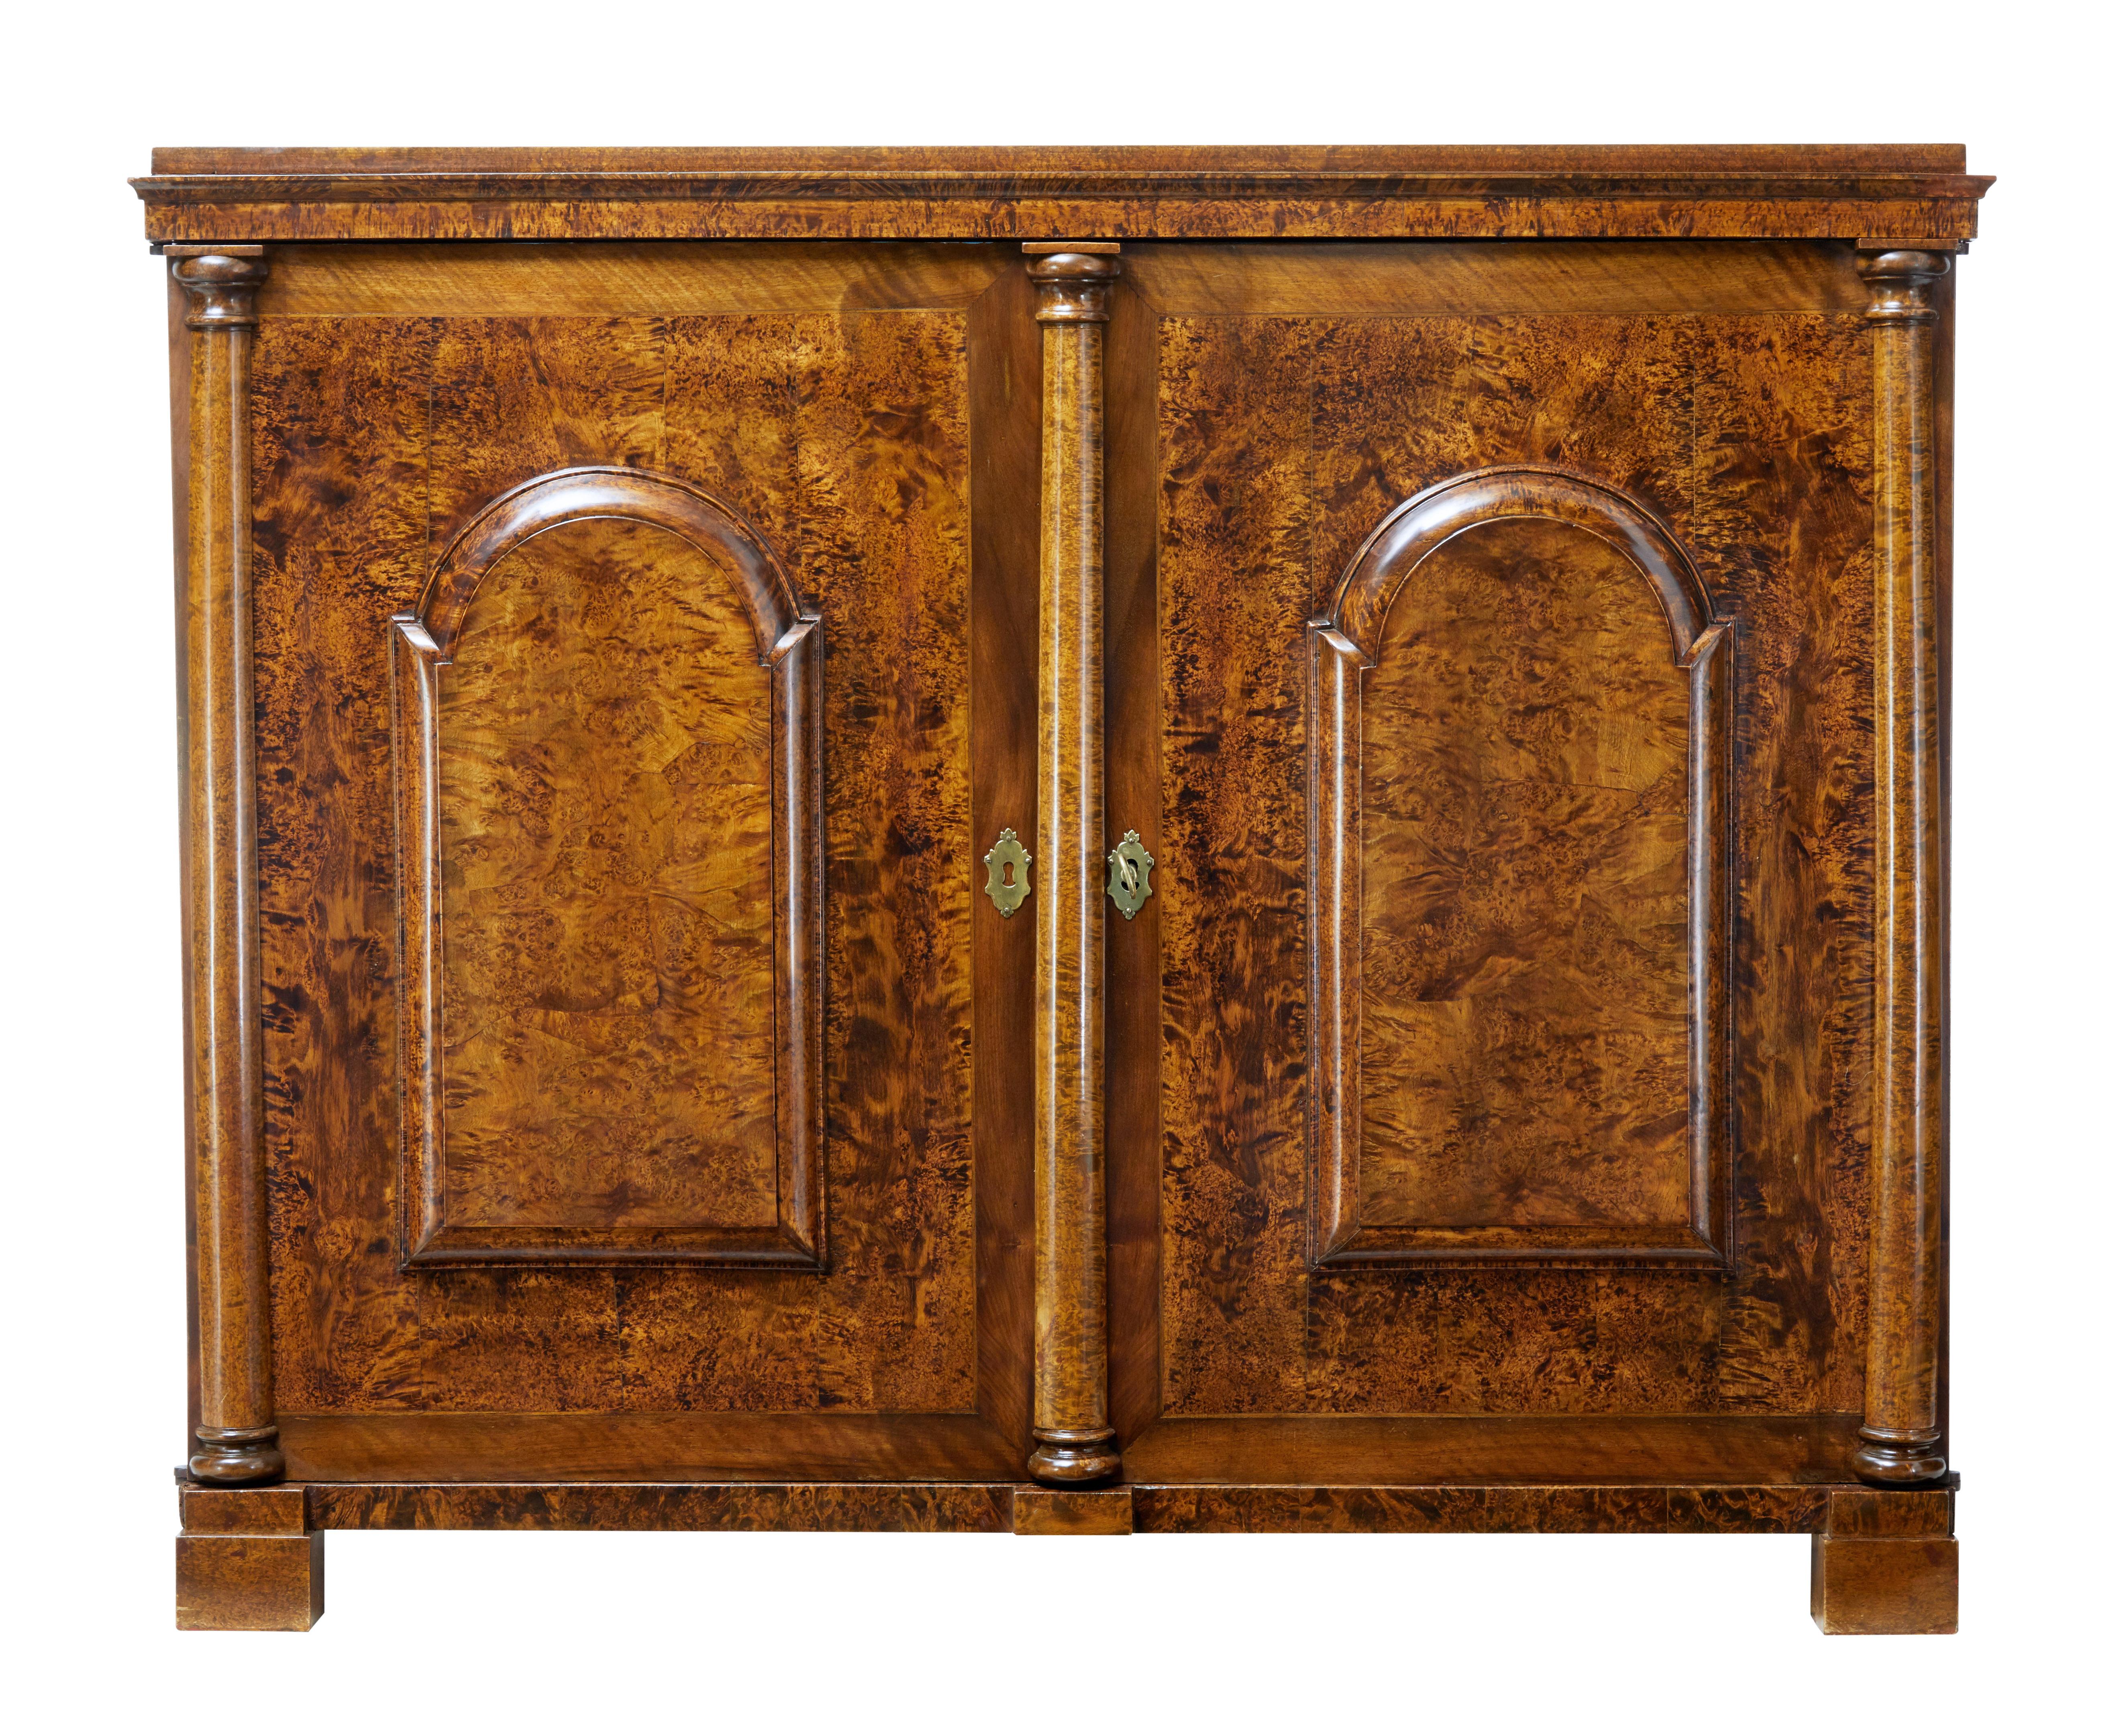 Stunning and rare cabinet in alder root, circa 1830.

Double door cabinet made from beautiful alder root veneers. Each door fitted with a block fronted panel, with central turned column flanked either side with columns on the corner. Sides with